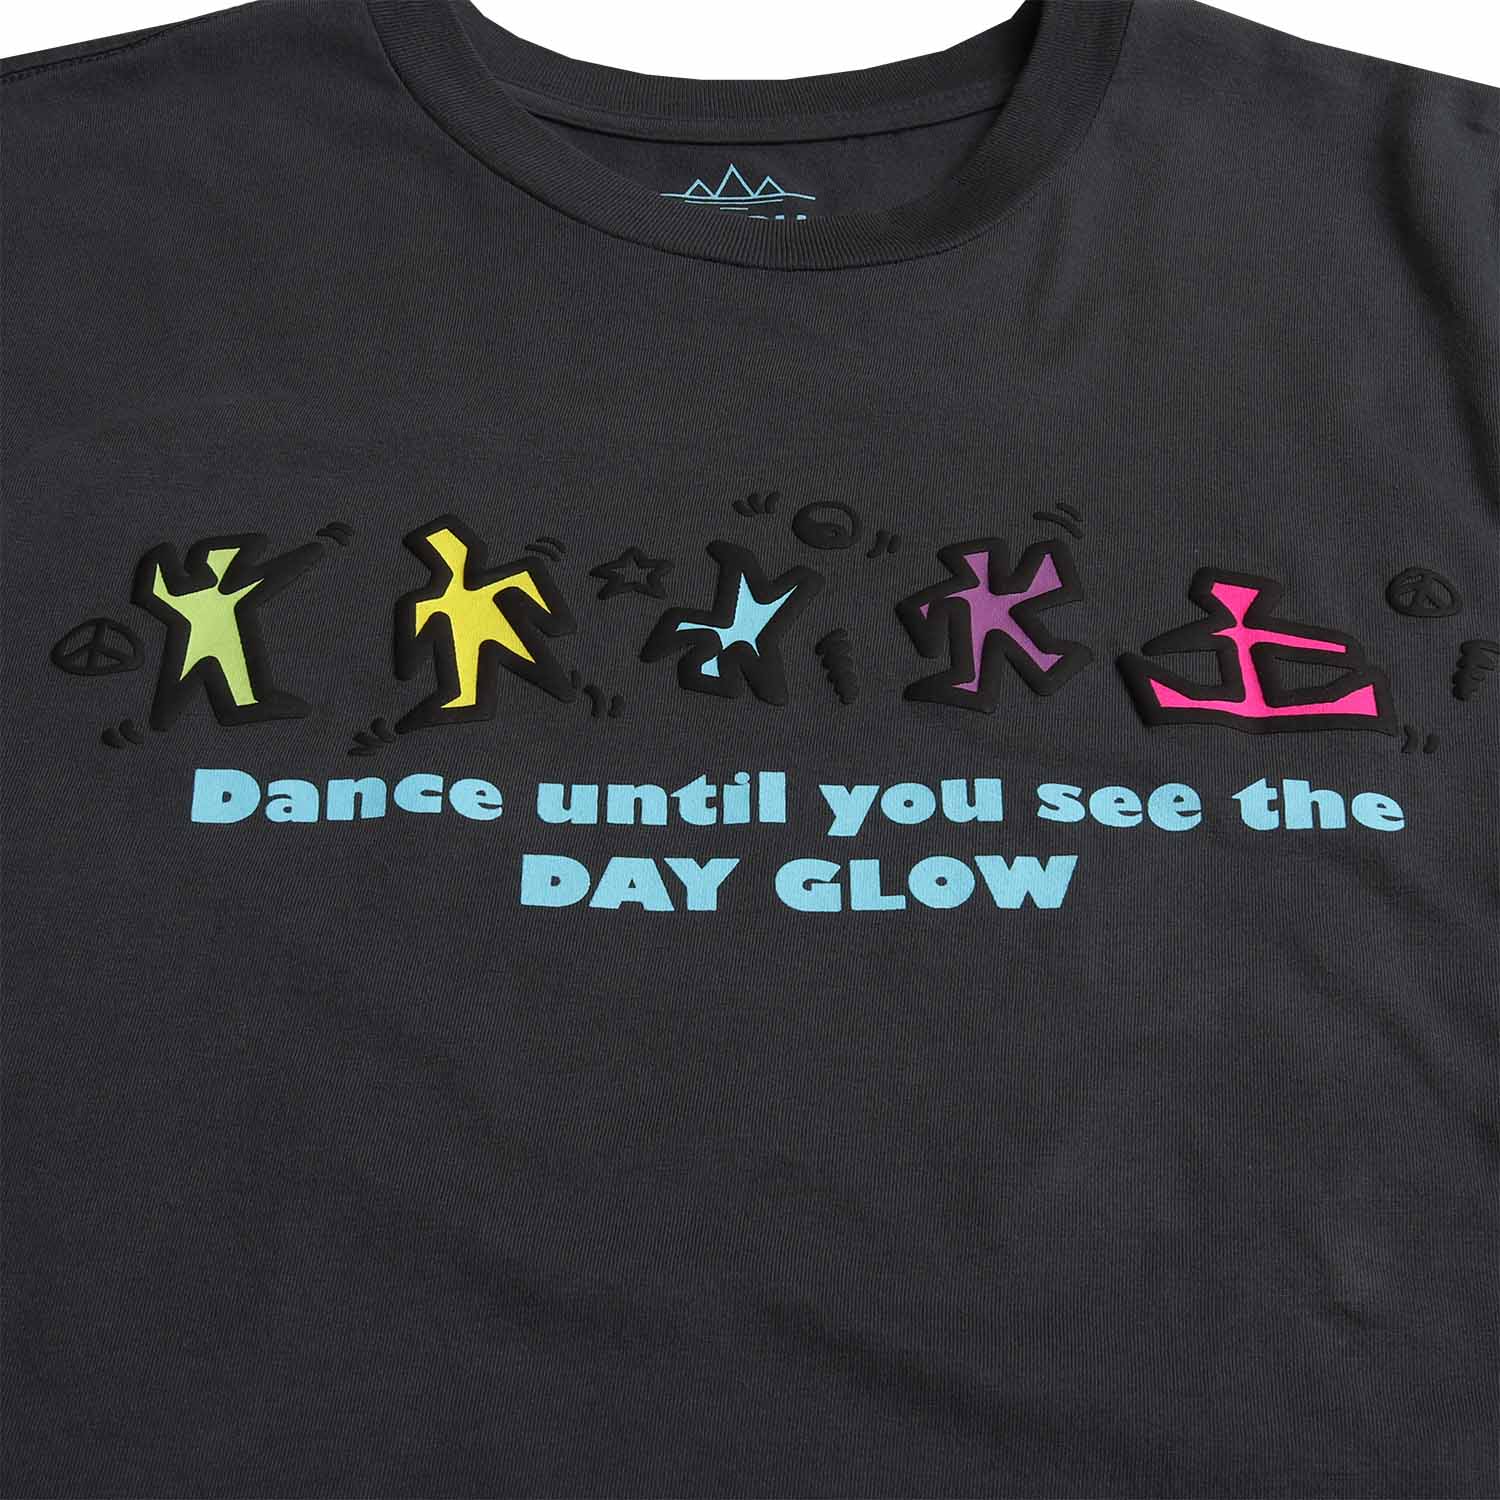 DANCE UNTIL YOU SEE THE DAY GLOW puffy ink graphic tee